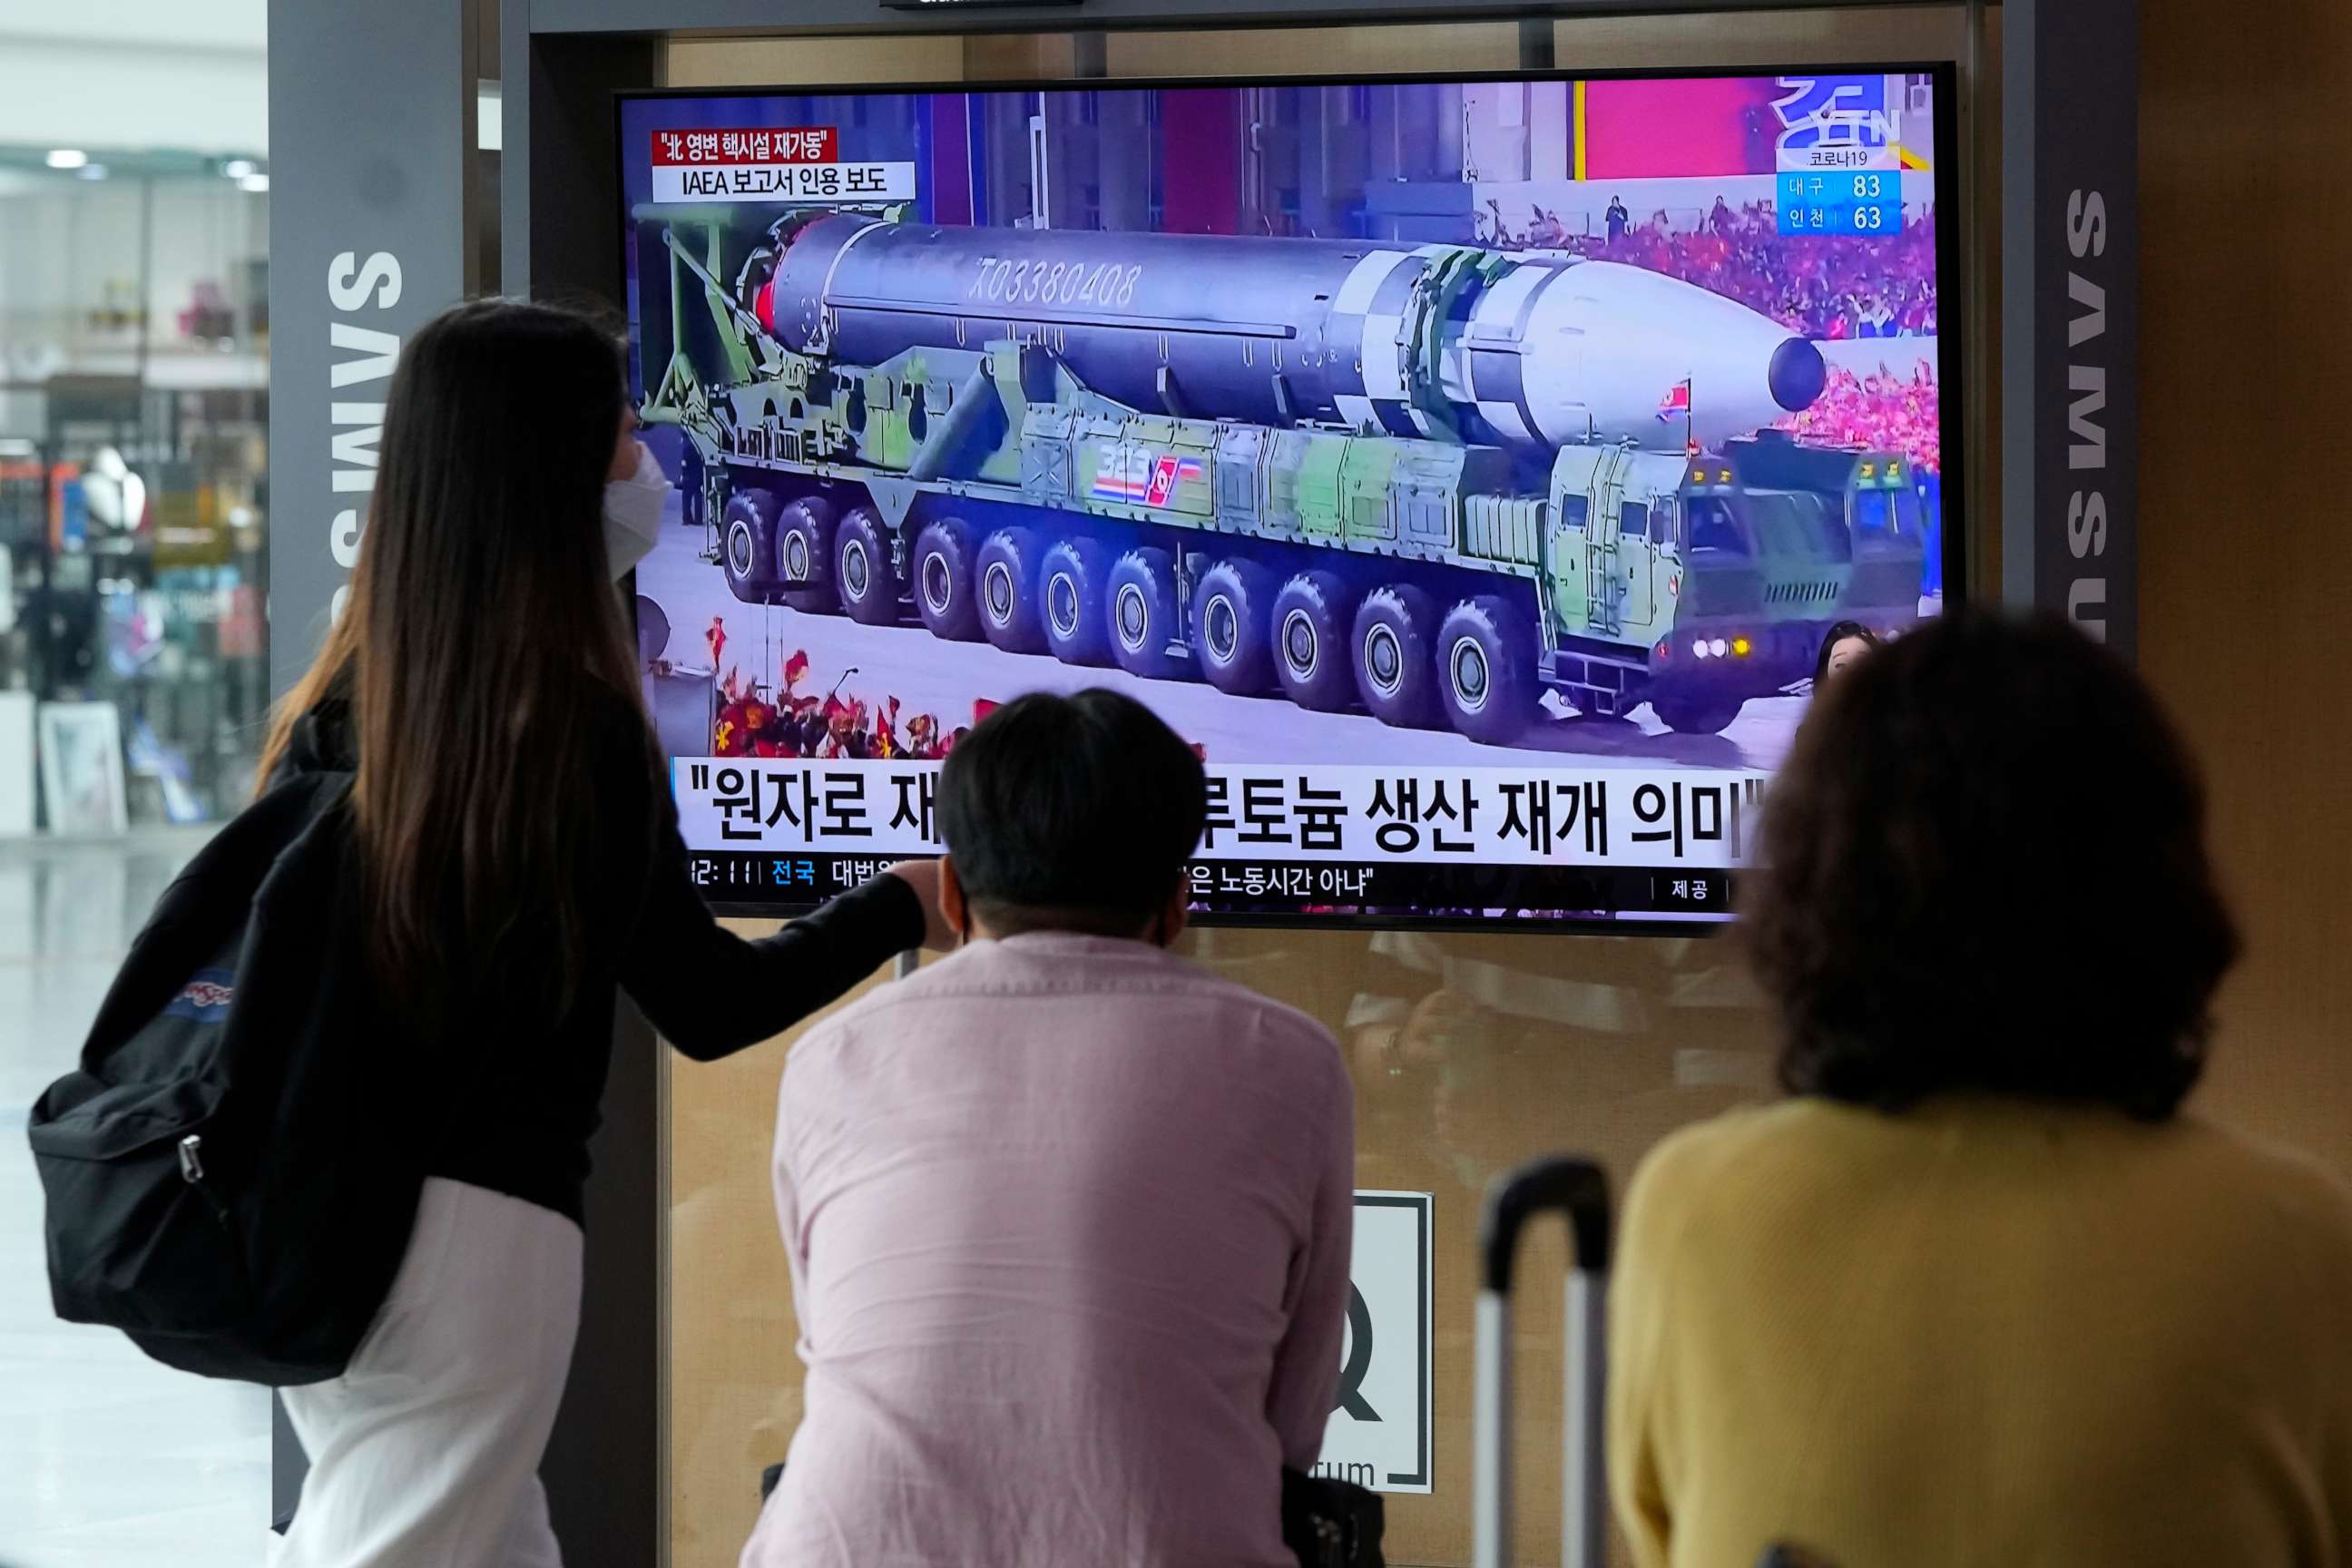 PHOTO: People watch a TV screen showing a file image of a North Korean missile in a military parade during a news program at the Seoul Railway Station in Seoul, South Korea, Monday, Aug. 30, 2021.